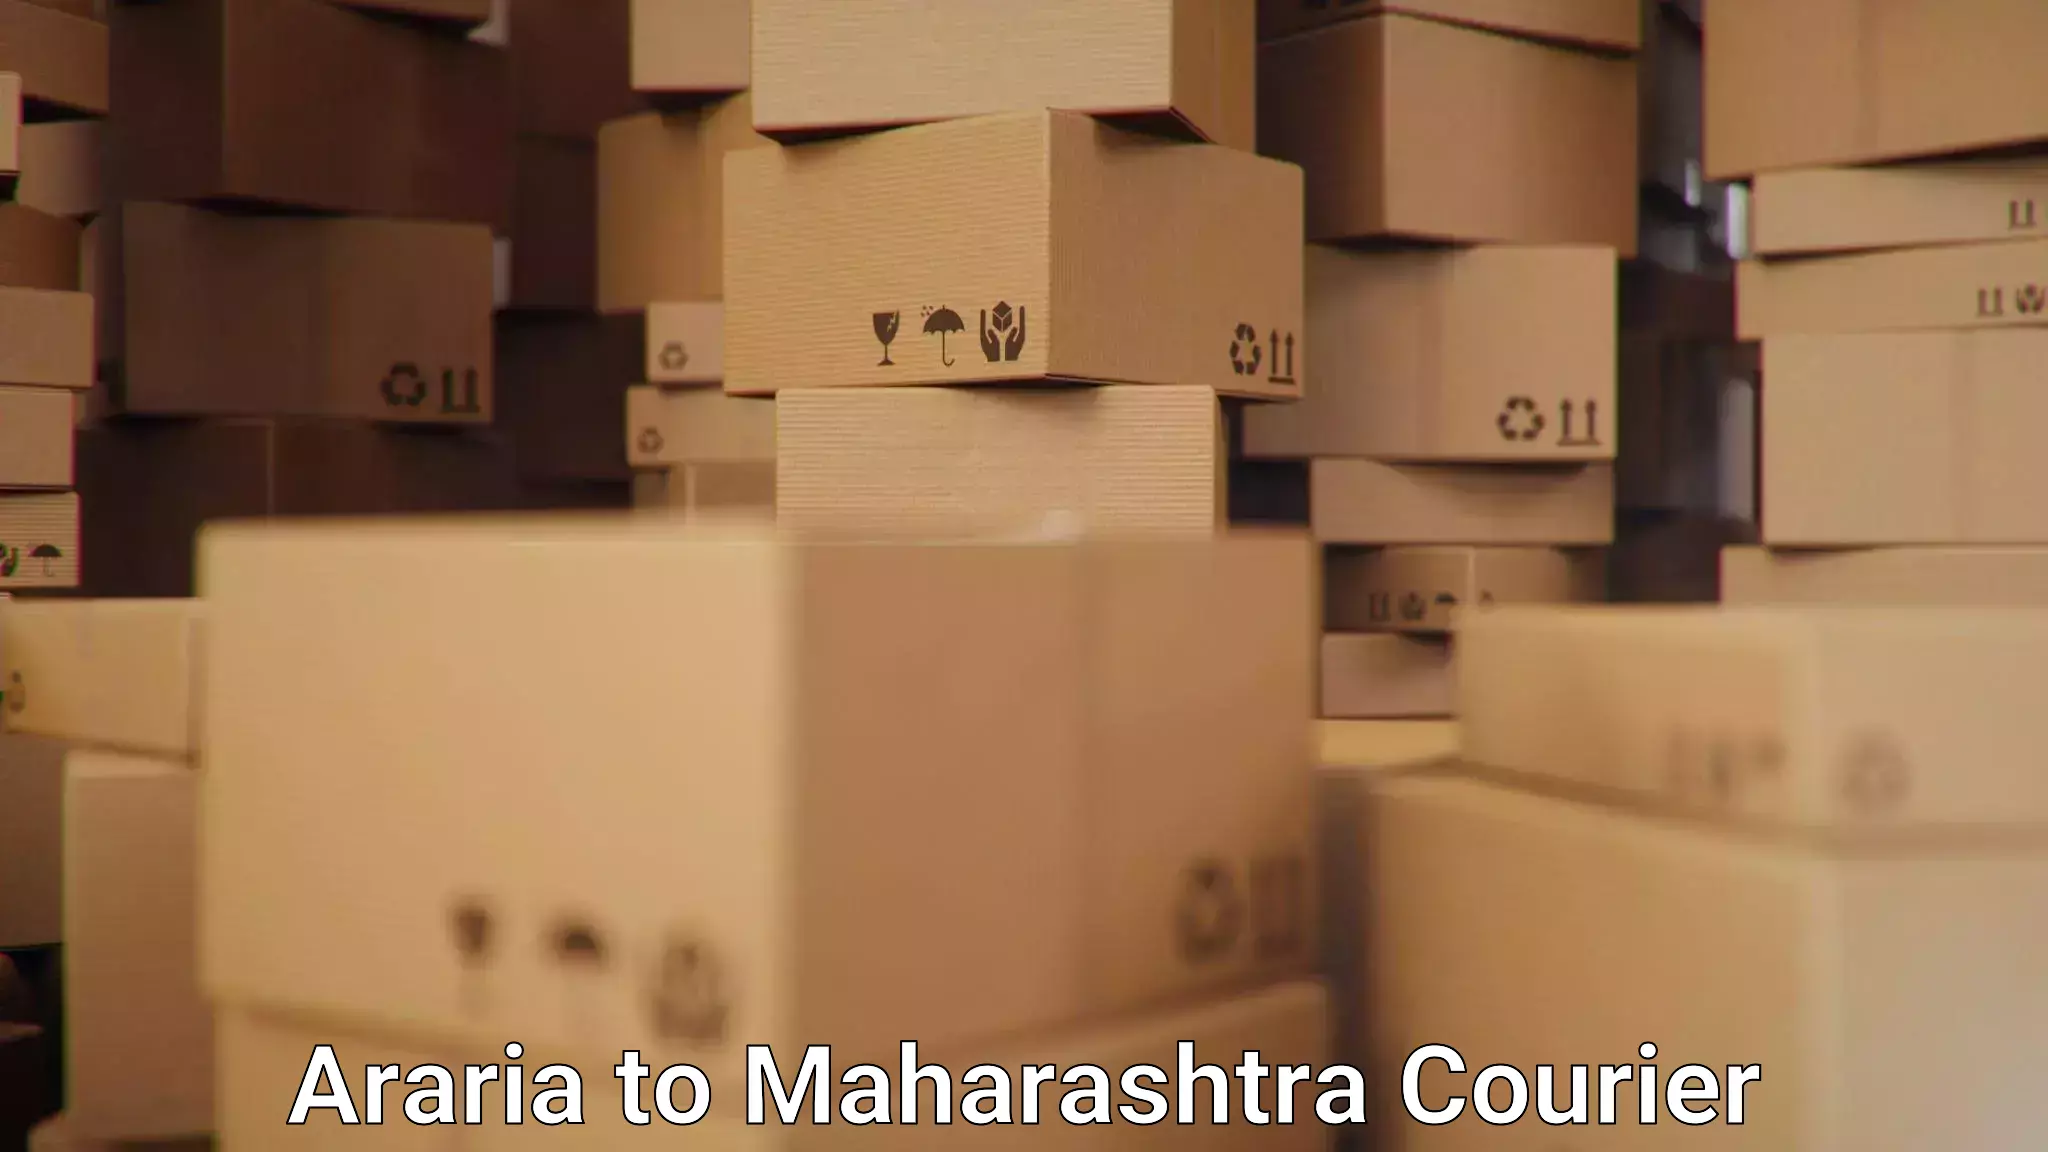 Reliable shipping partners Araria to Karad